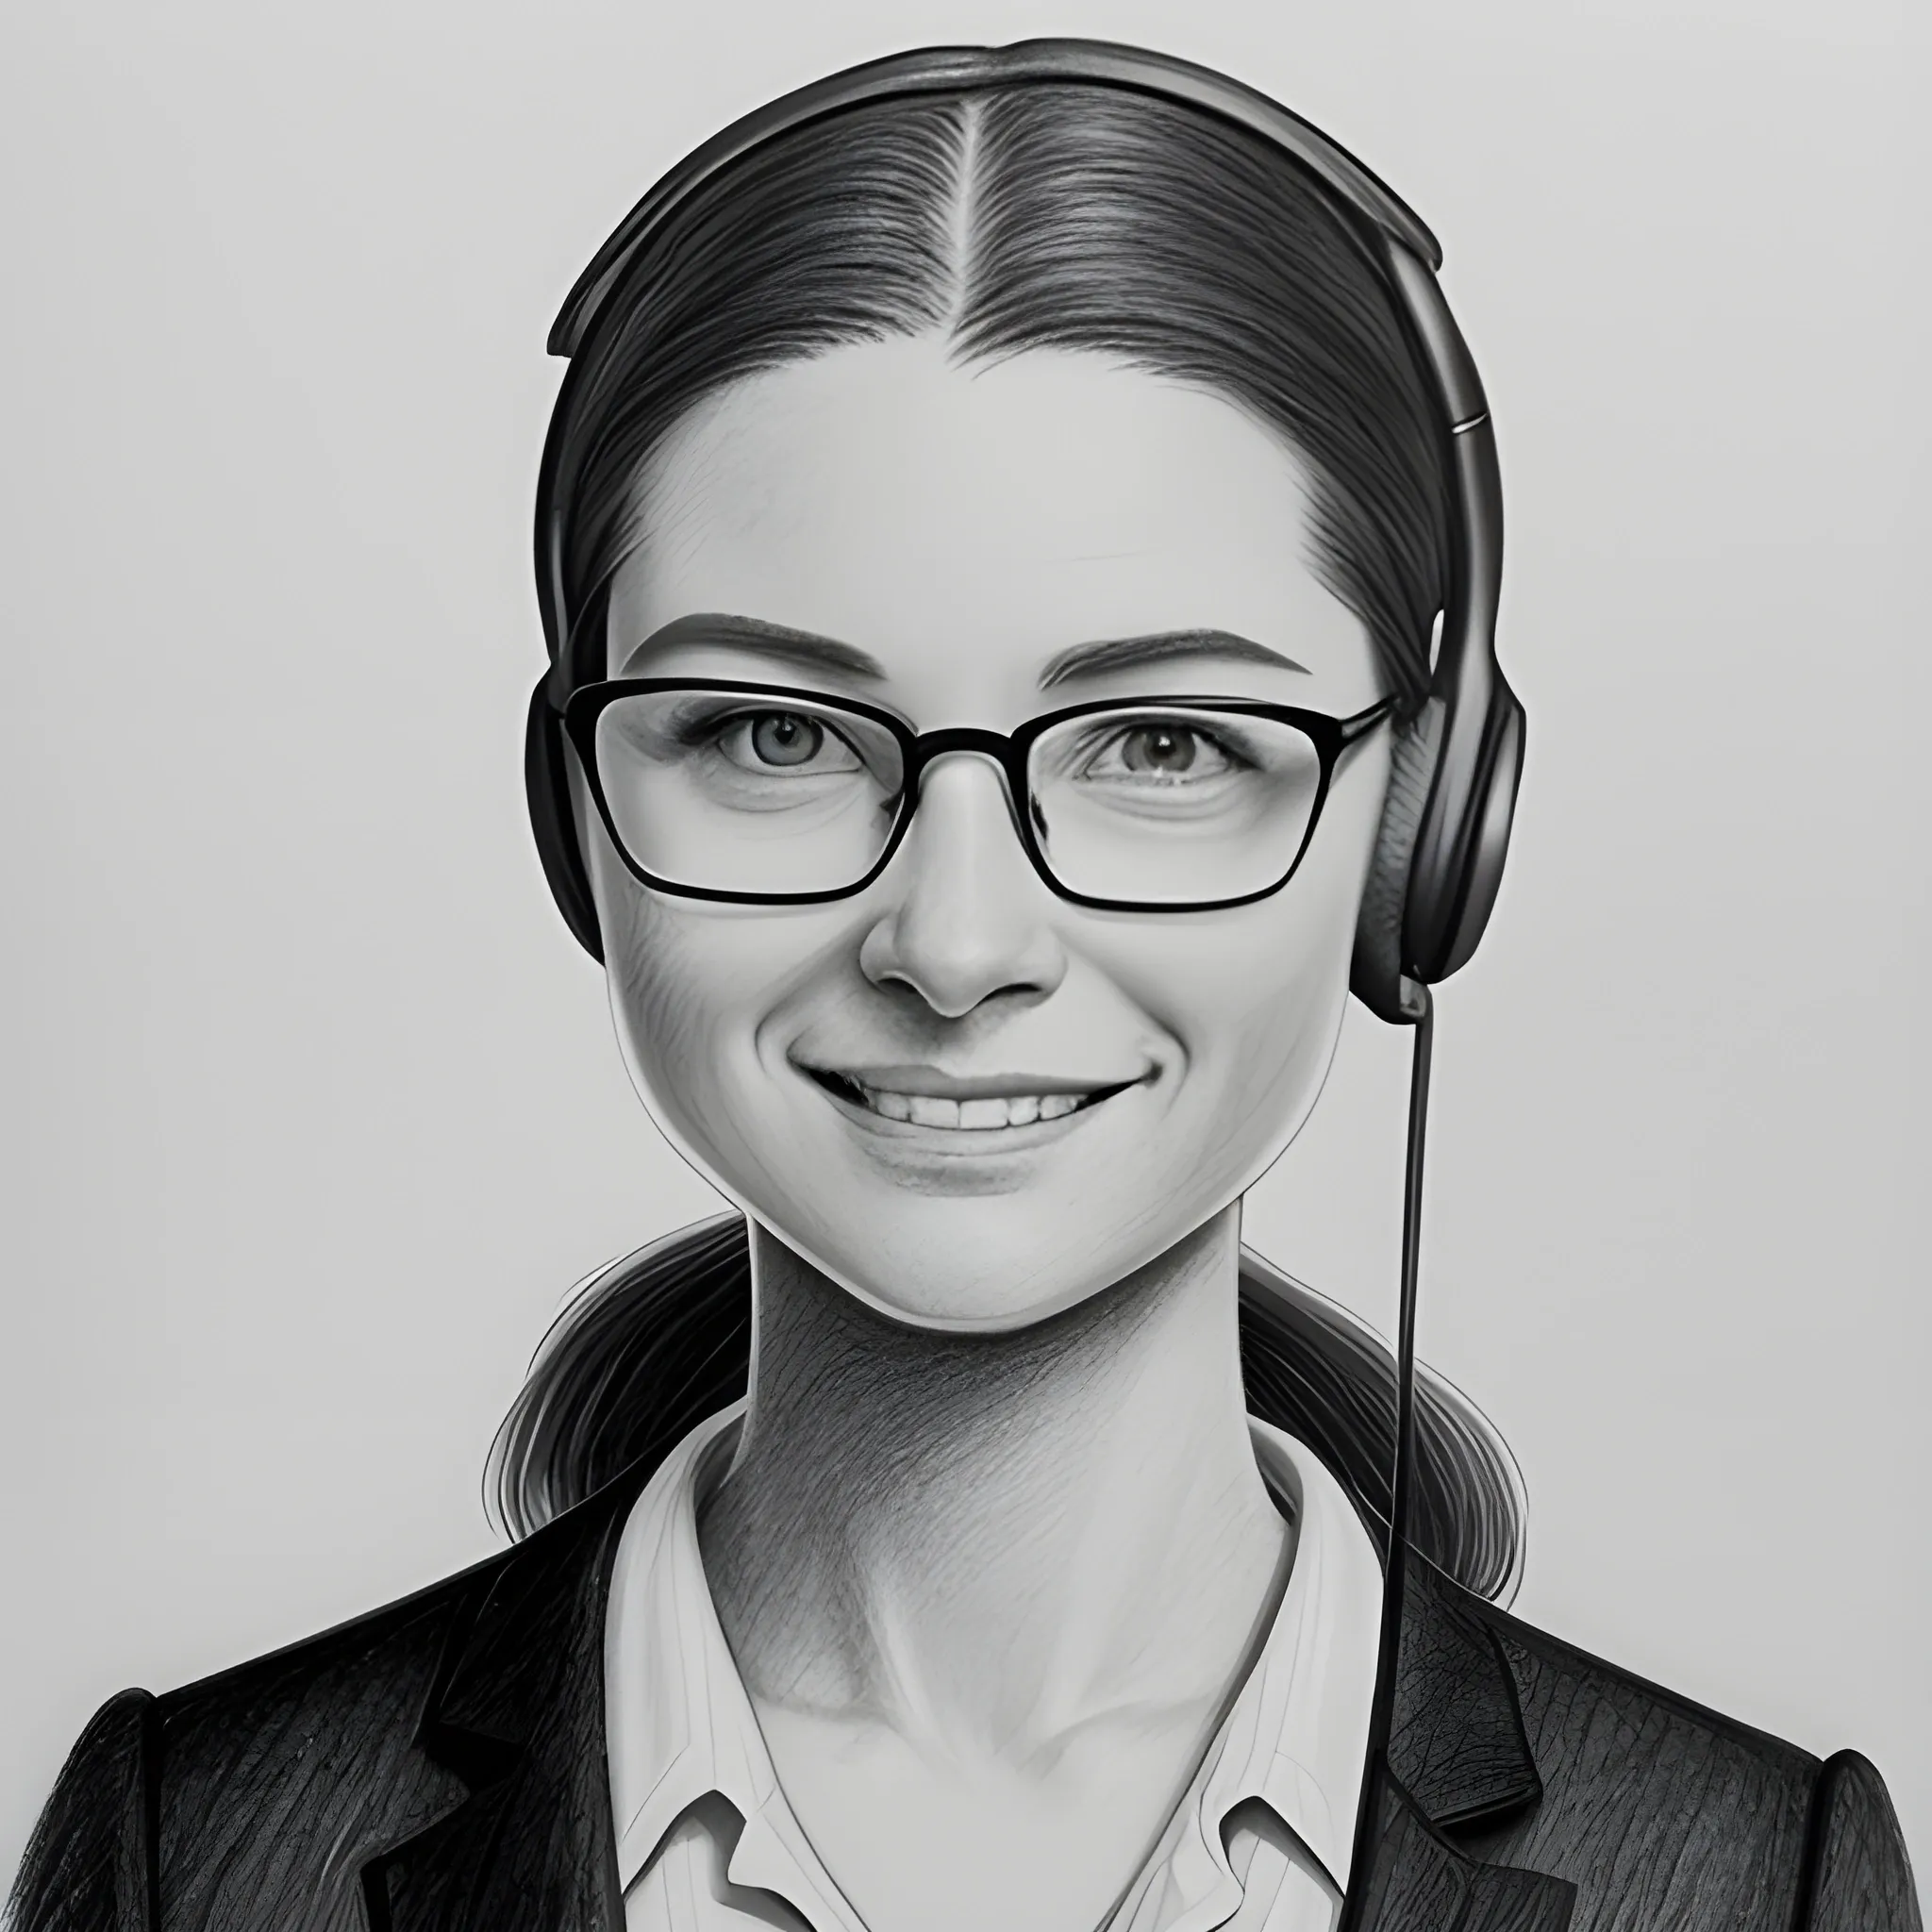 Emily, the customer care specialist, has a warm and welcoming appearance that puts customers at ease. She wears sleek, black-framed glasses that accentuate her attentive and intelligent gaze. Her shoulder-length brown hair is neatly pulled back in a professional ponytail, revealing a stylish headset with a noise-canceling microphone that ensures clear customer communication. Emily's friendly smile is a constant reminder of her empathetic nature, making her the ideal representative for any customer service interaction, hyper-realistic photography, 8k, indirect lighting --s 750, Pencil Sketch